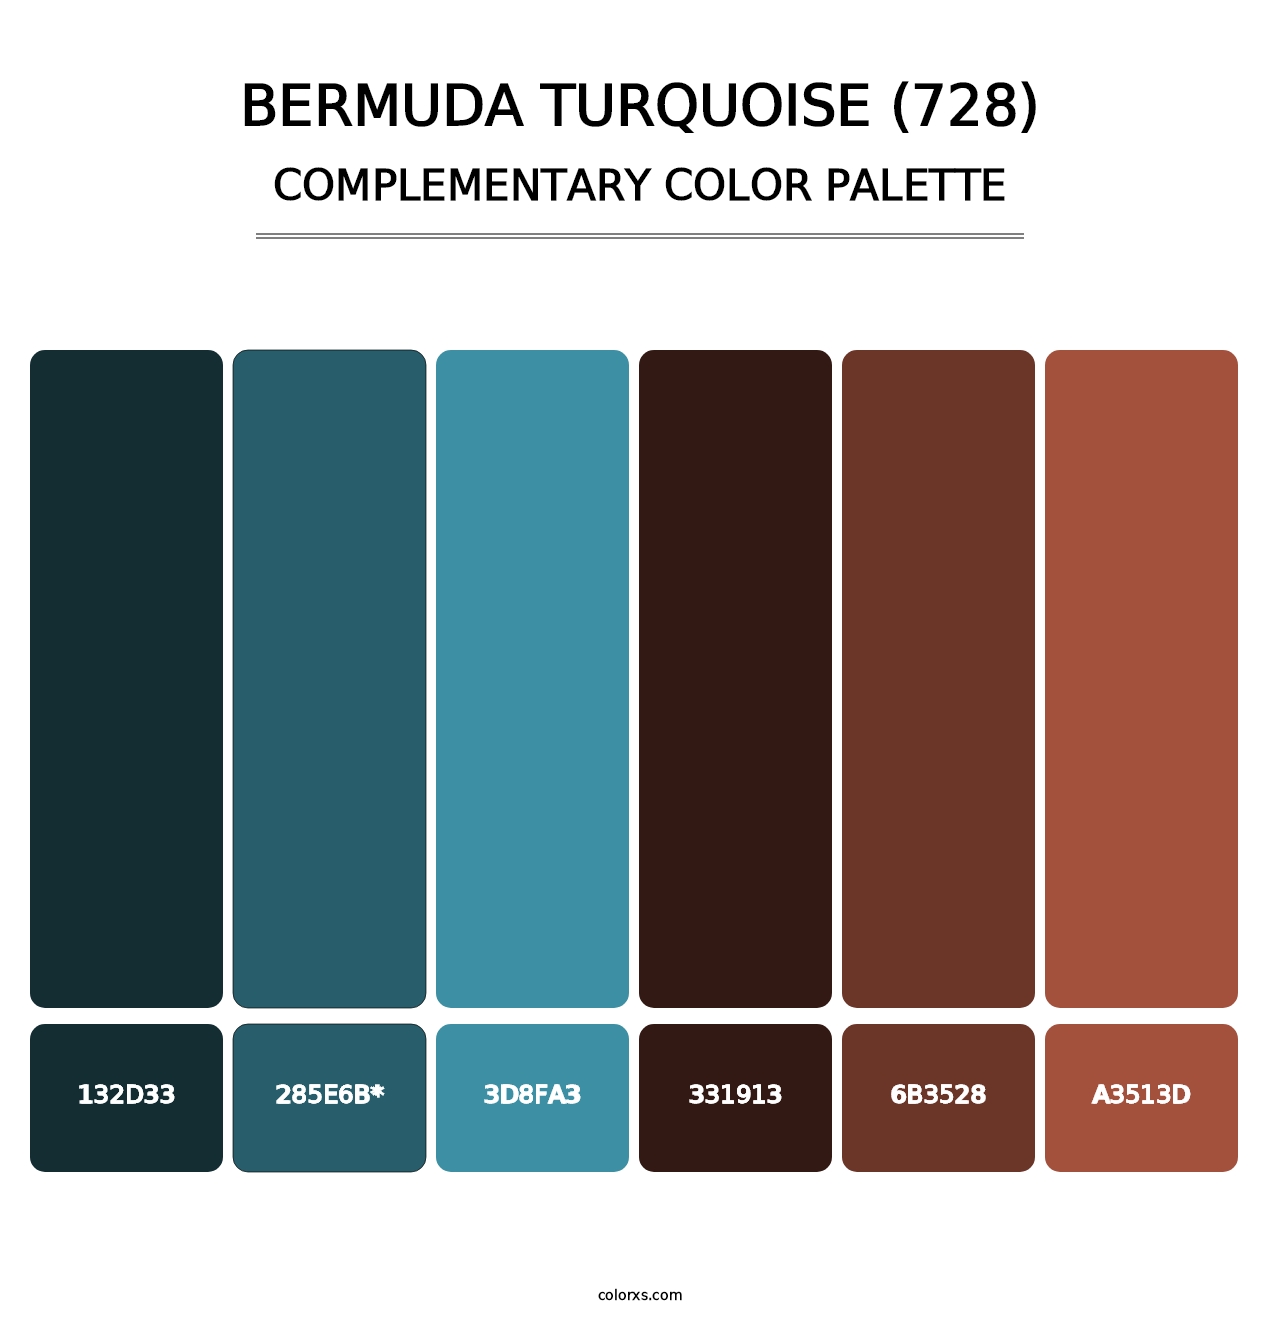 Bermuda Turquoise (728) - Complementary Color Palette